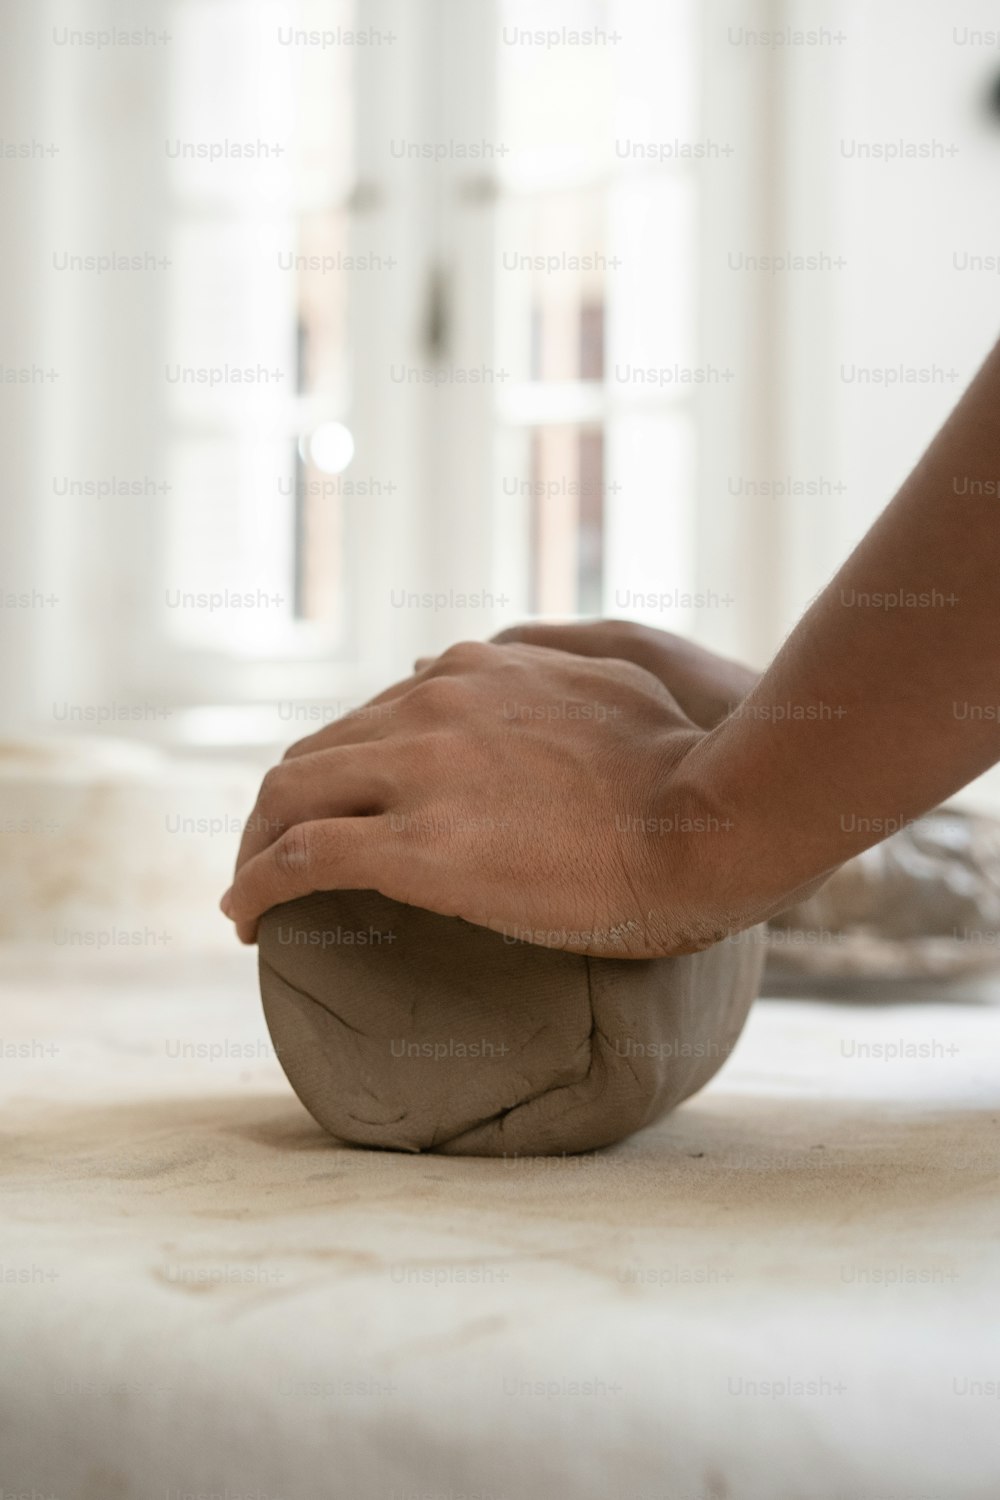 a person is kneading a ball of dough on a table